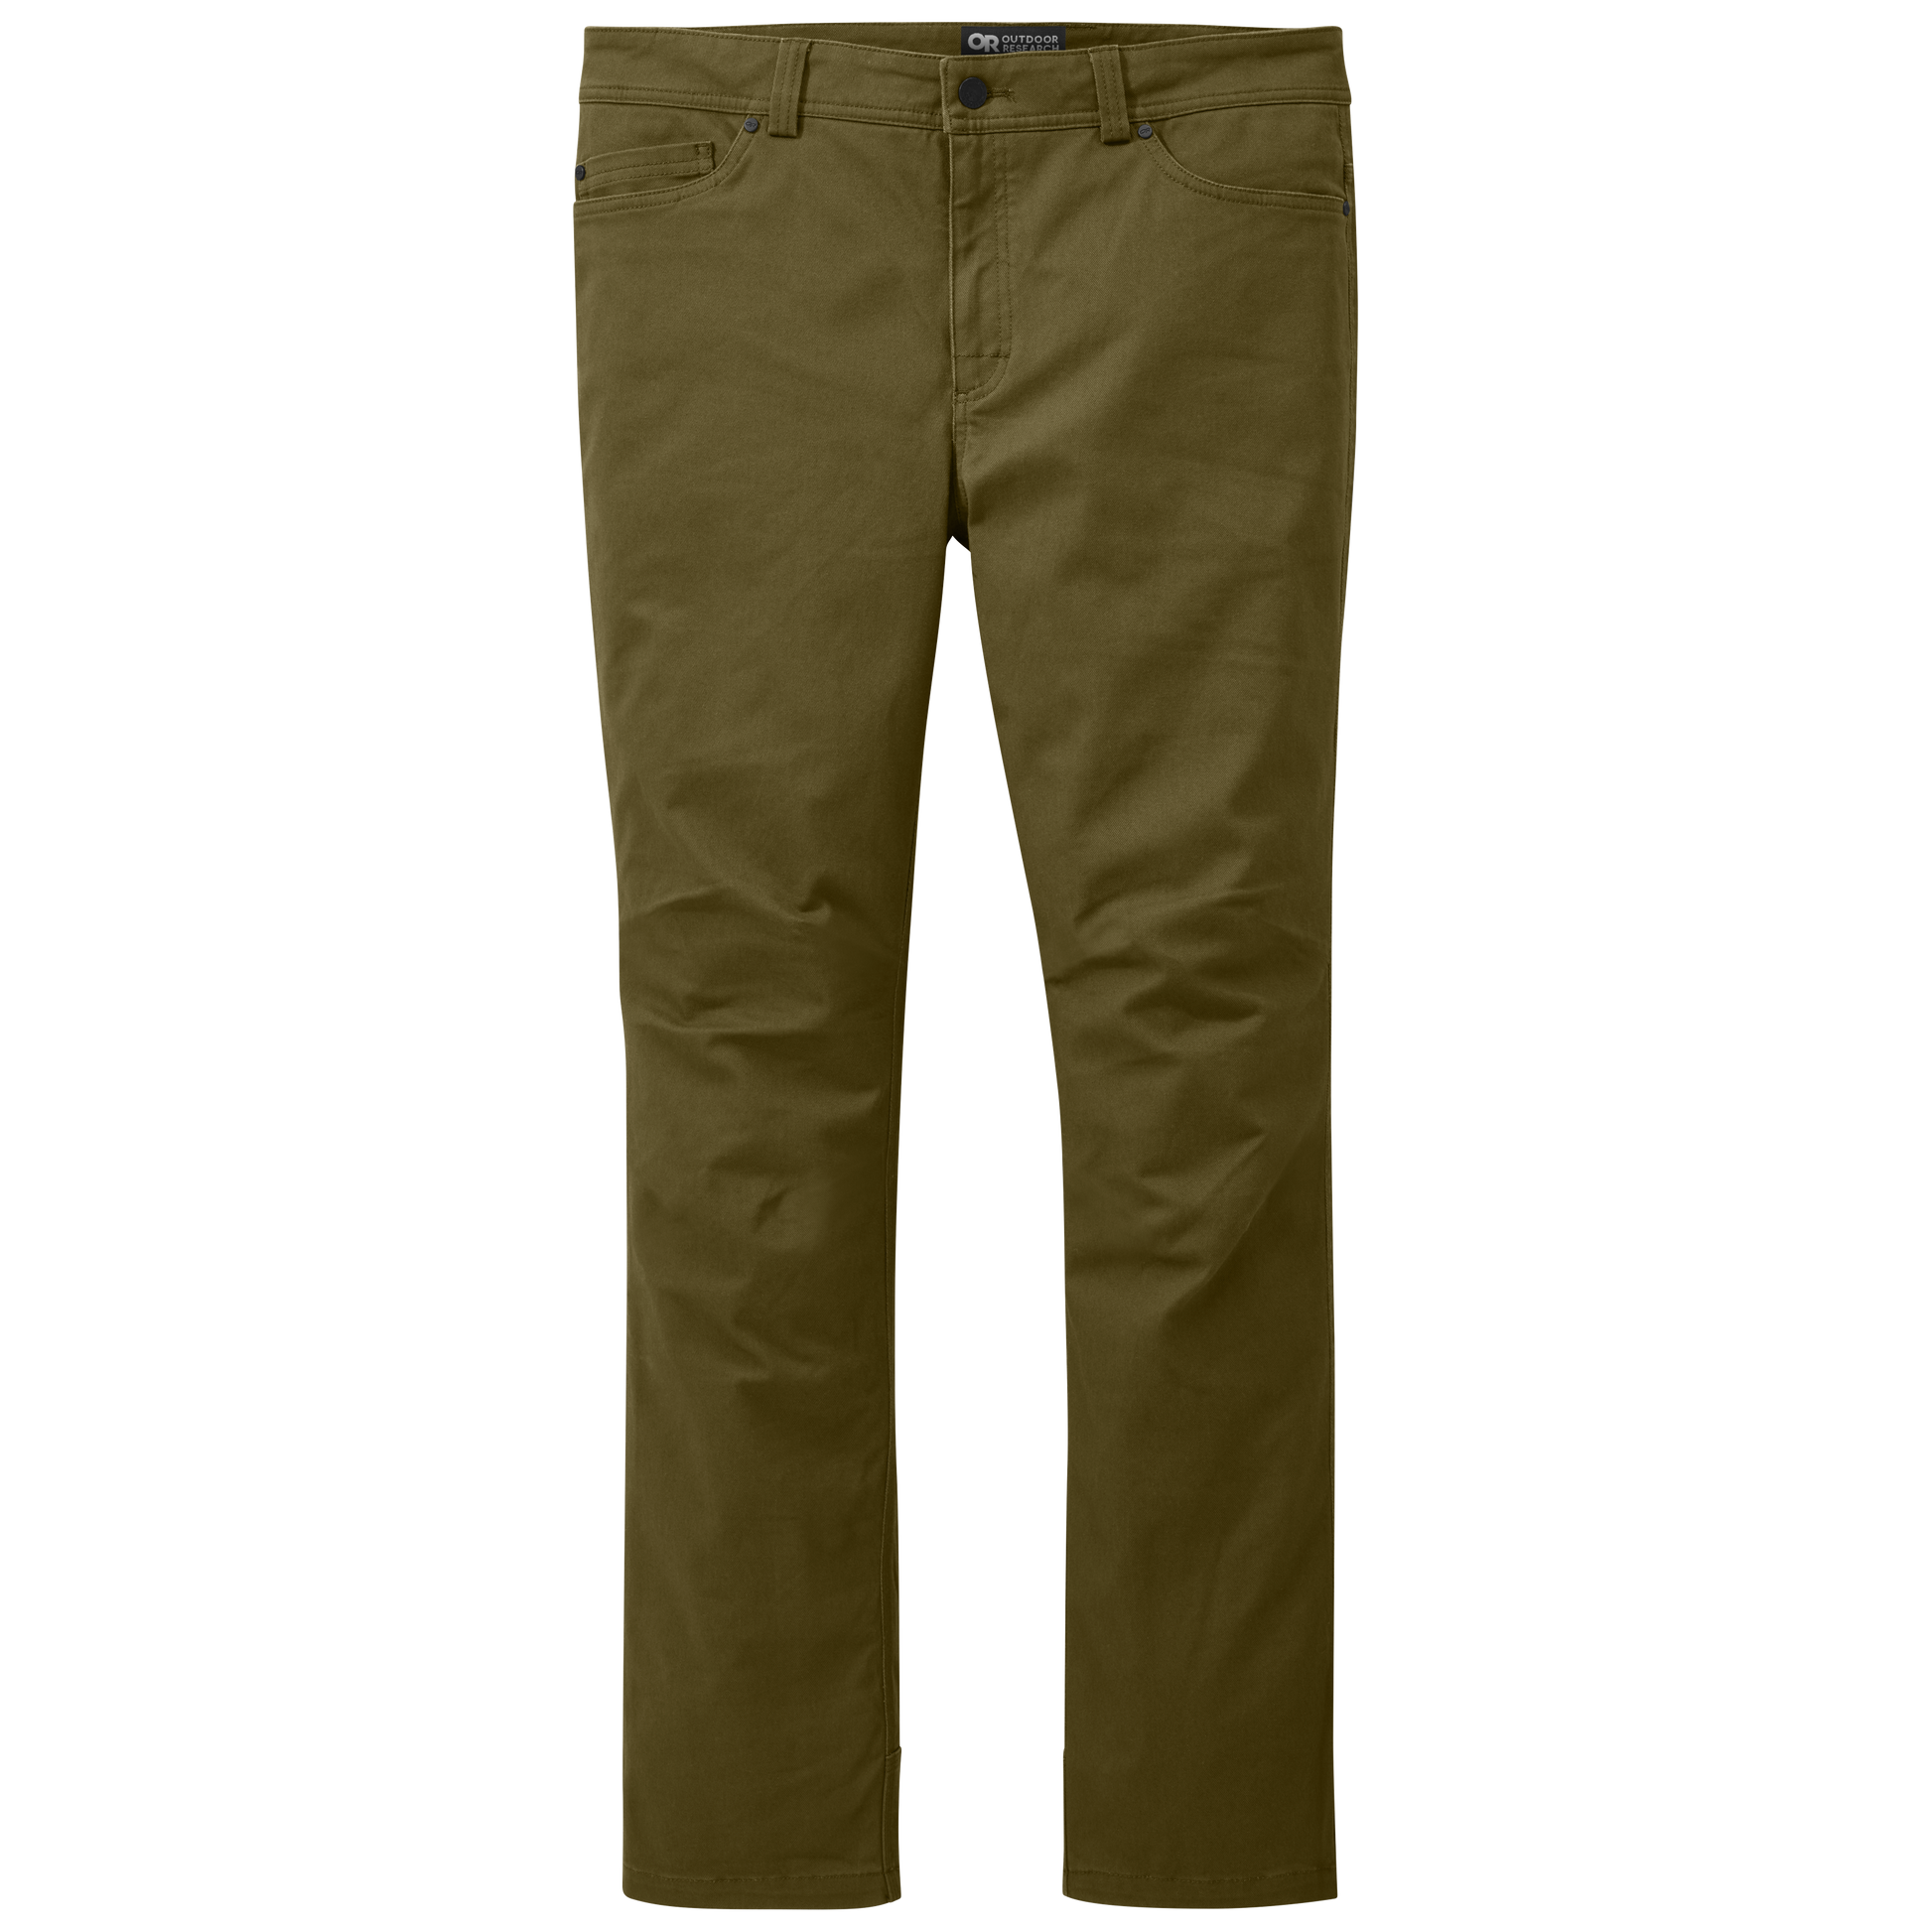 32 Degrees Solid Green Casual Pants Size L - 70% off